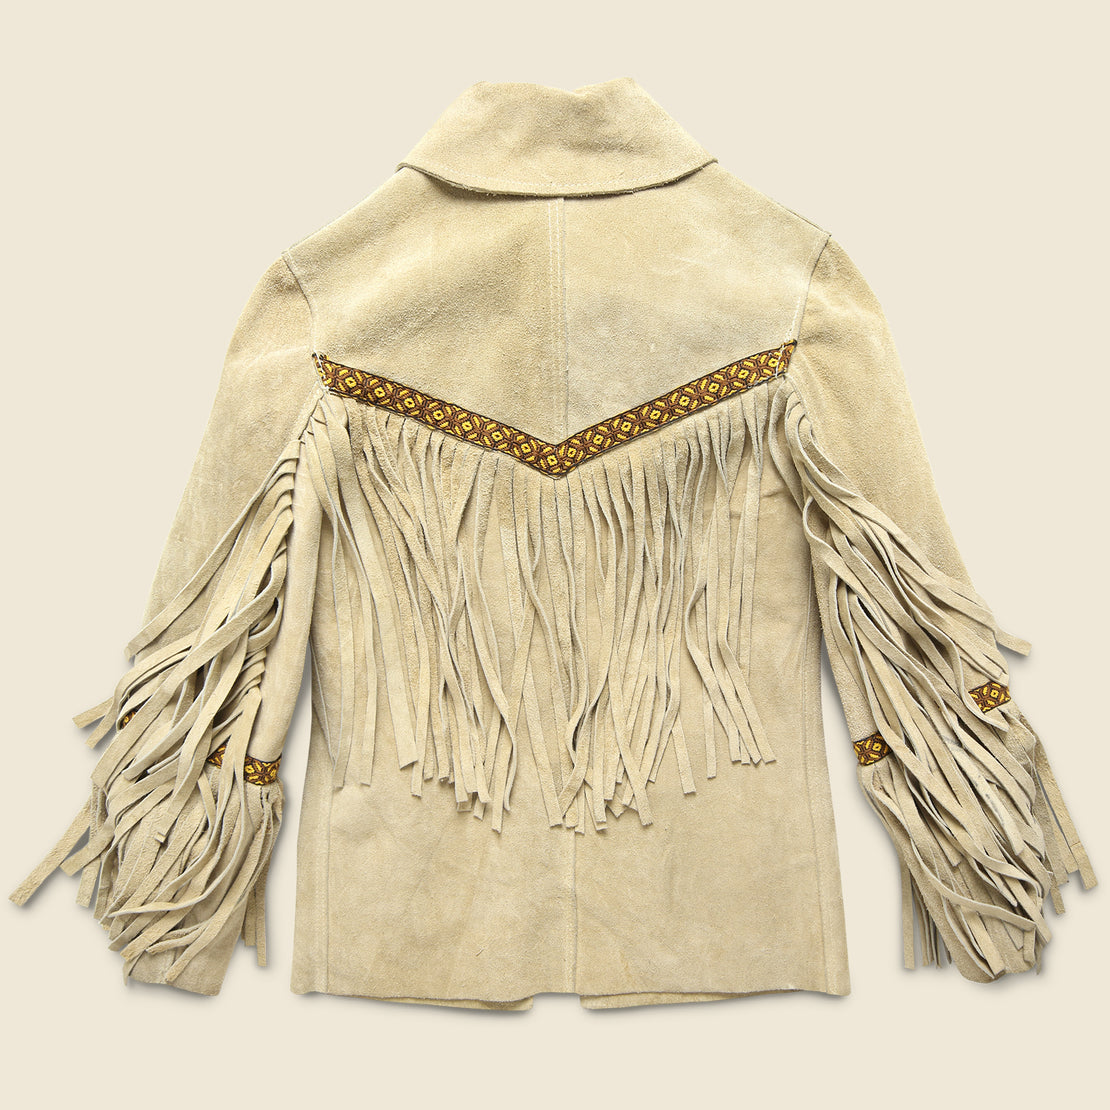 1960s Handmade Suede Fringe Jacket - Tan - Vintage - STAG Provisions - W - Outerwear - Coat/Jacket